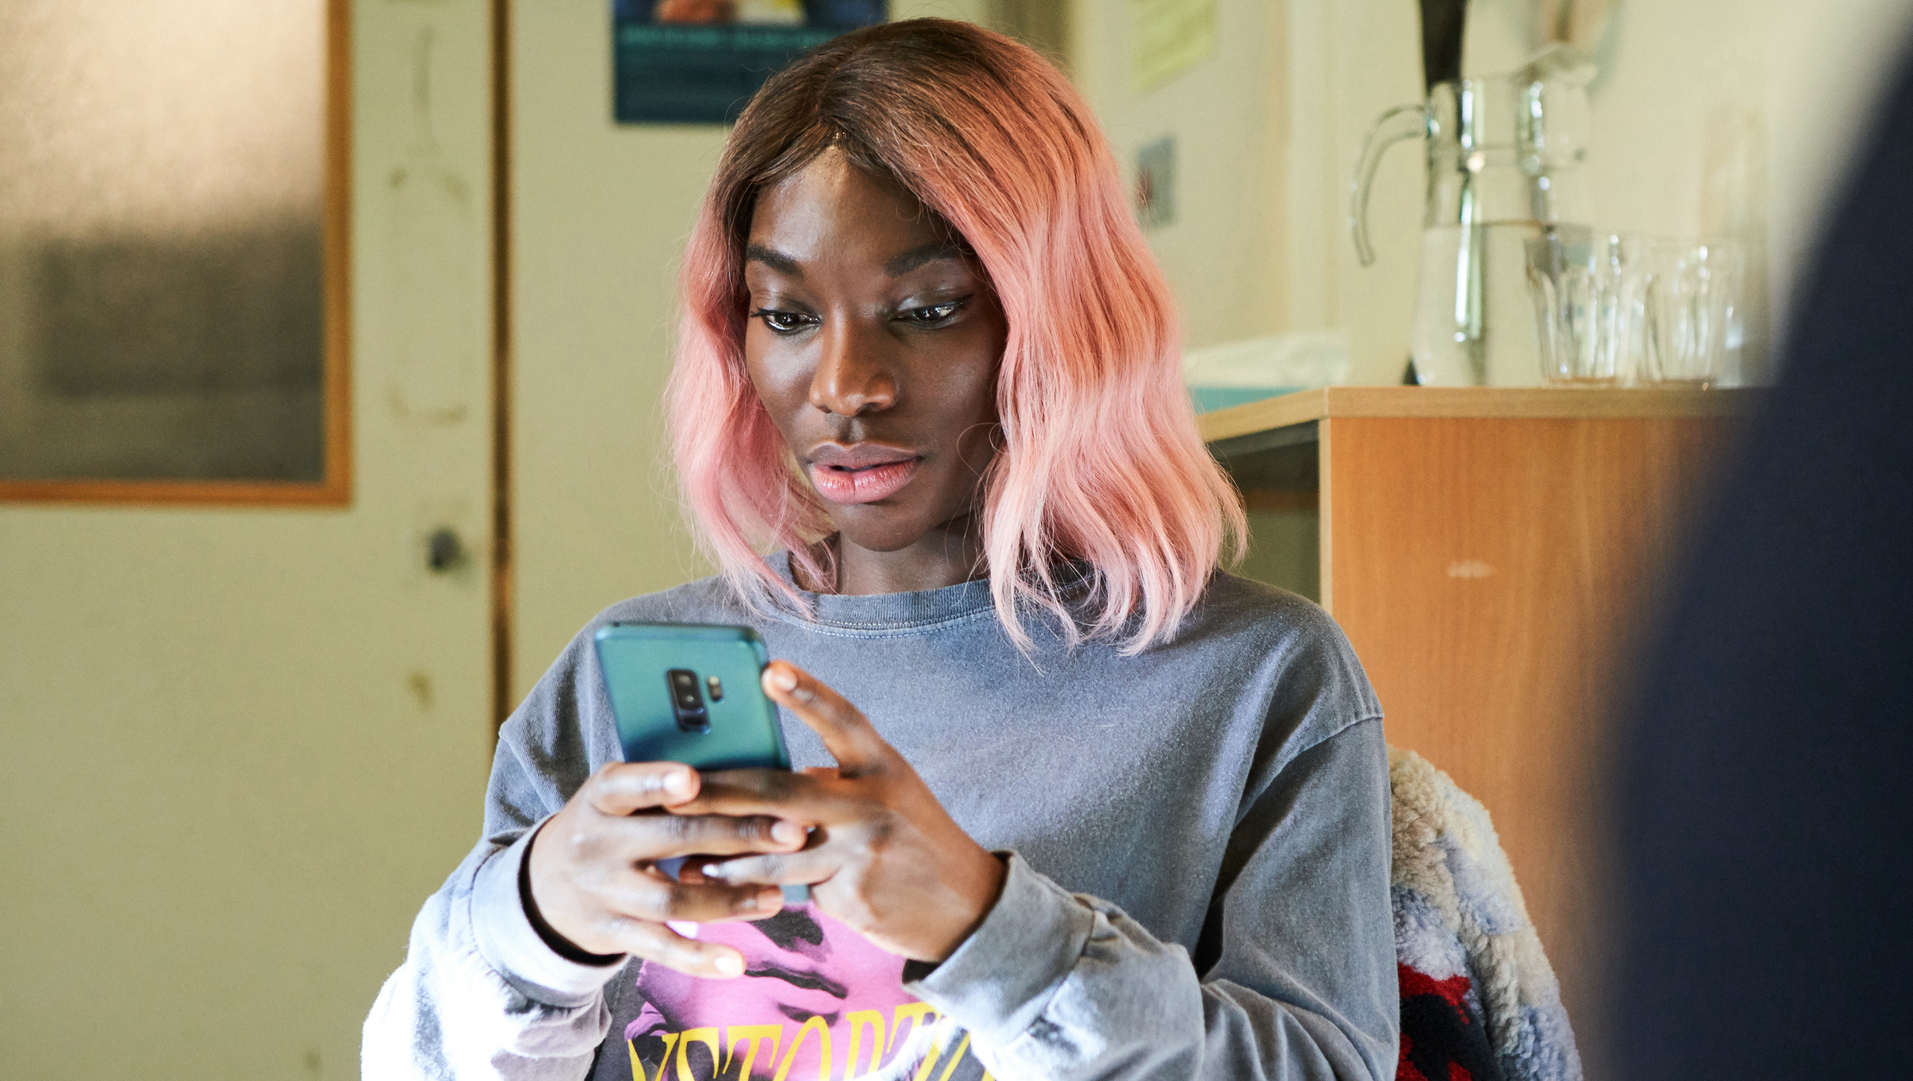 A picture of Arabella (Michaela Coel) looking at her phone in "I May Destroy You."